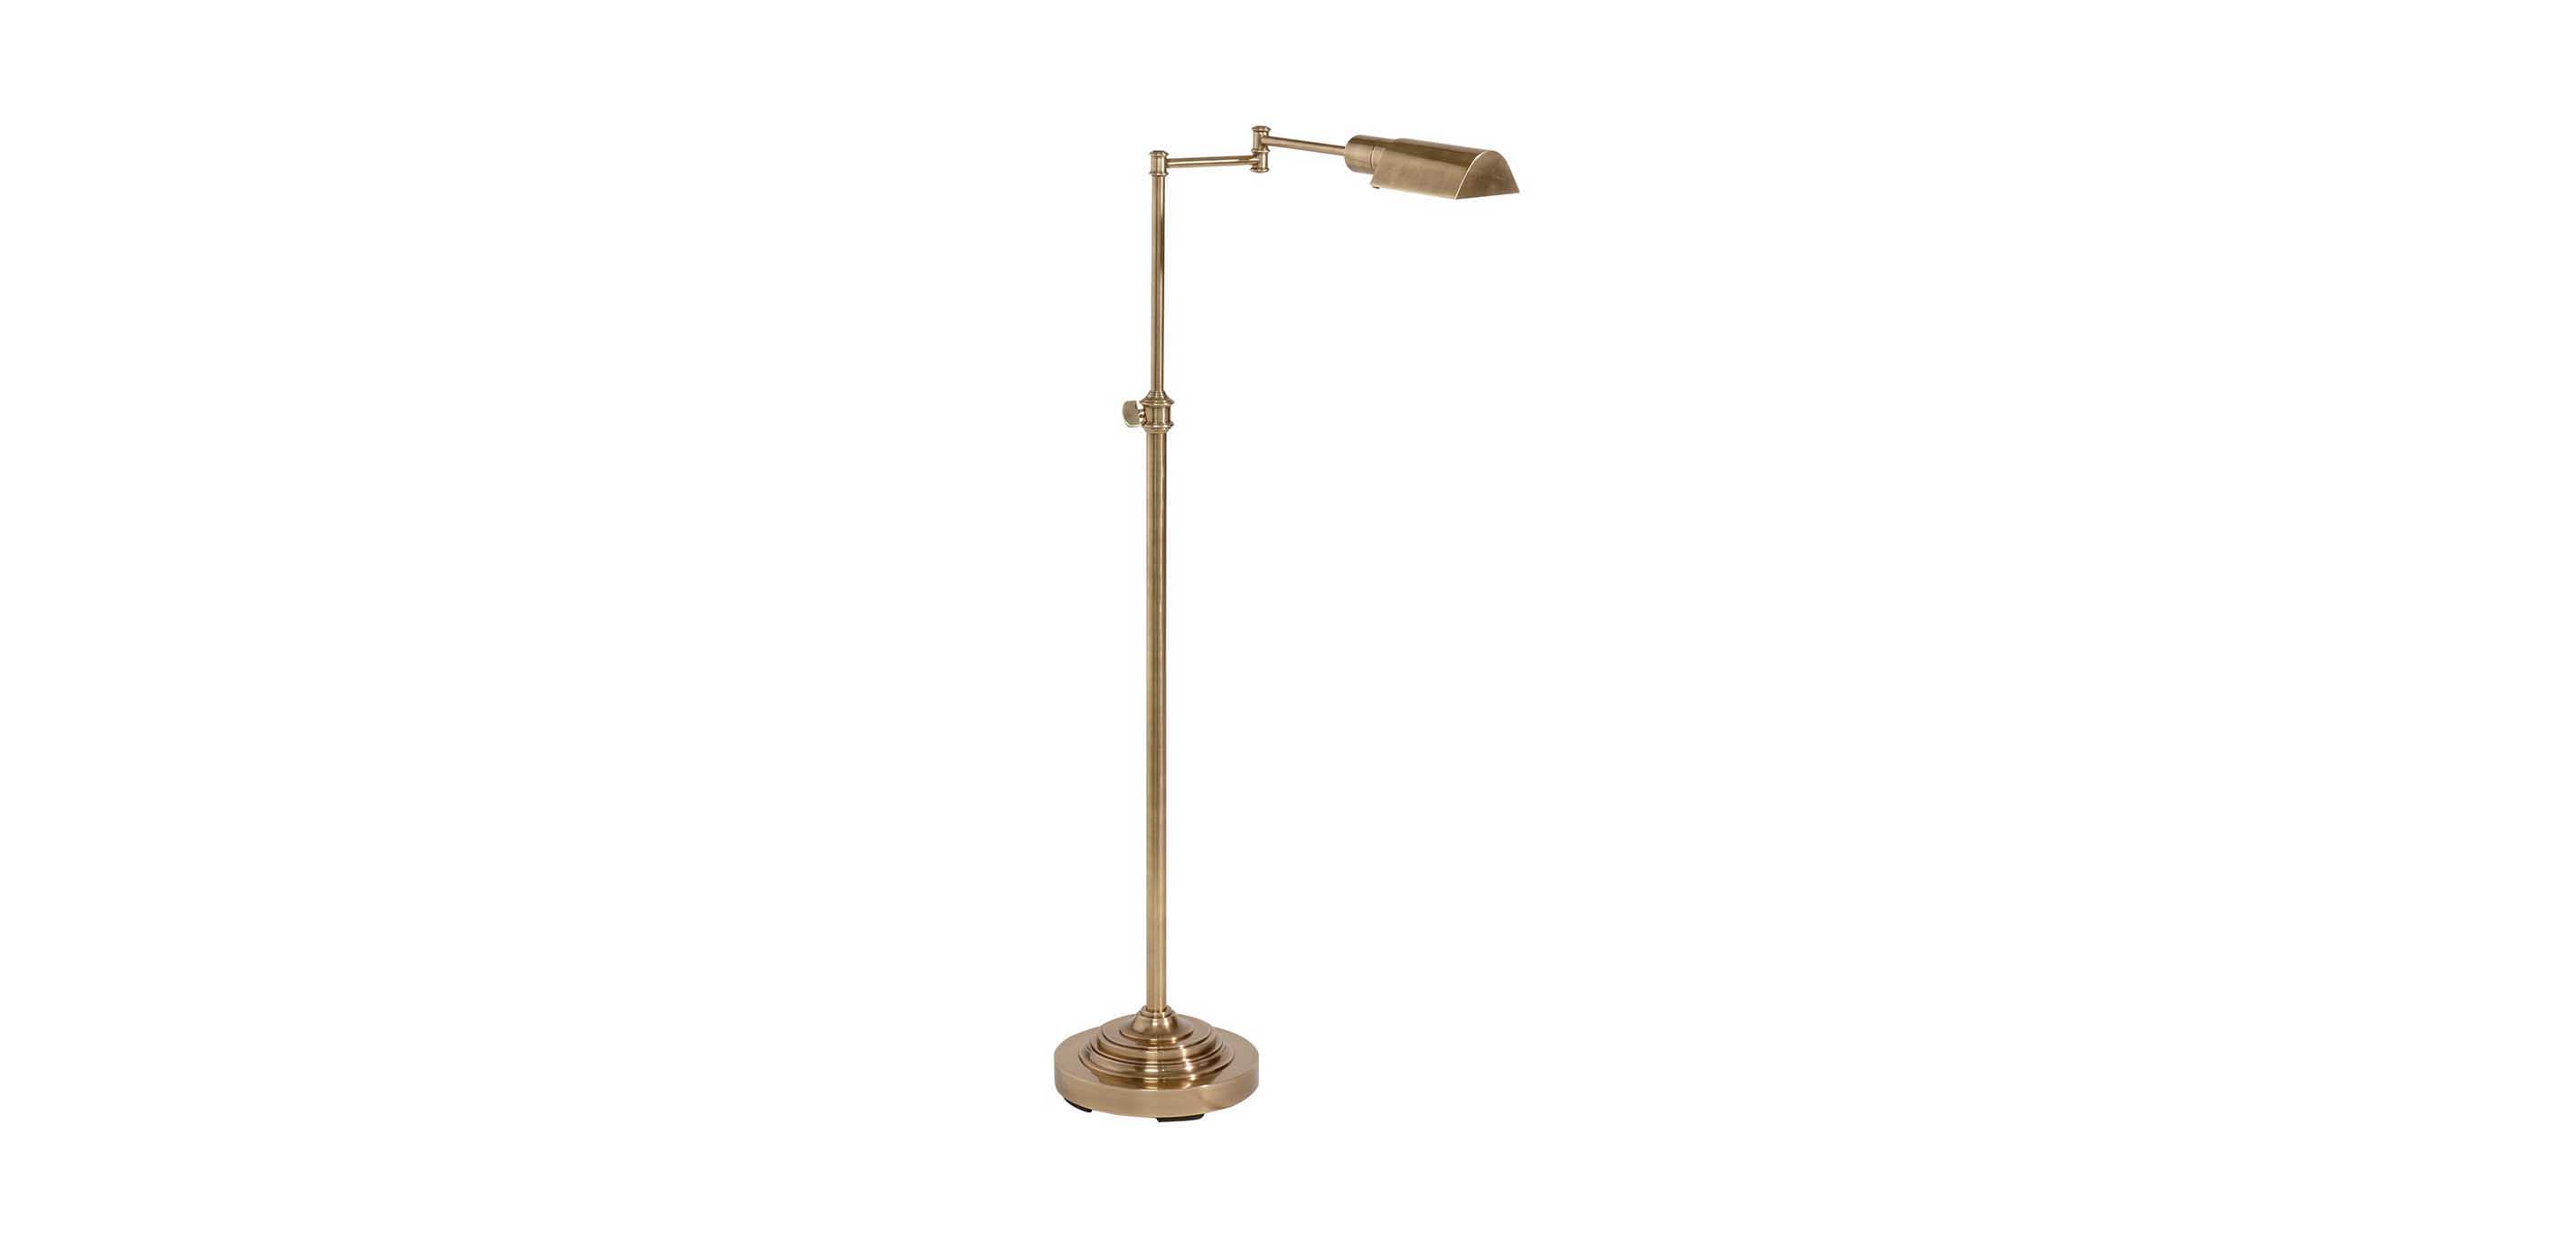  360 Lighting Dawson Traditional Task Pharmacy Light Floor Lamp  Standing 55 Tall Antique Brass Metal Adjustable Balance Boom Arm Gold  Shade Decor for Living Room Reading House Bedroom Home : Home